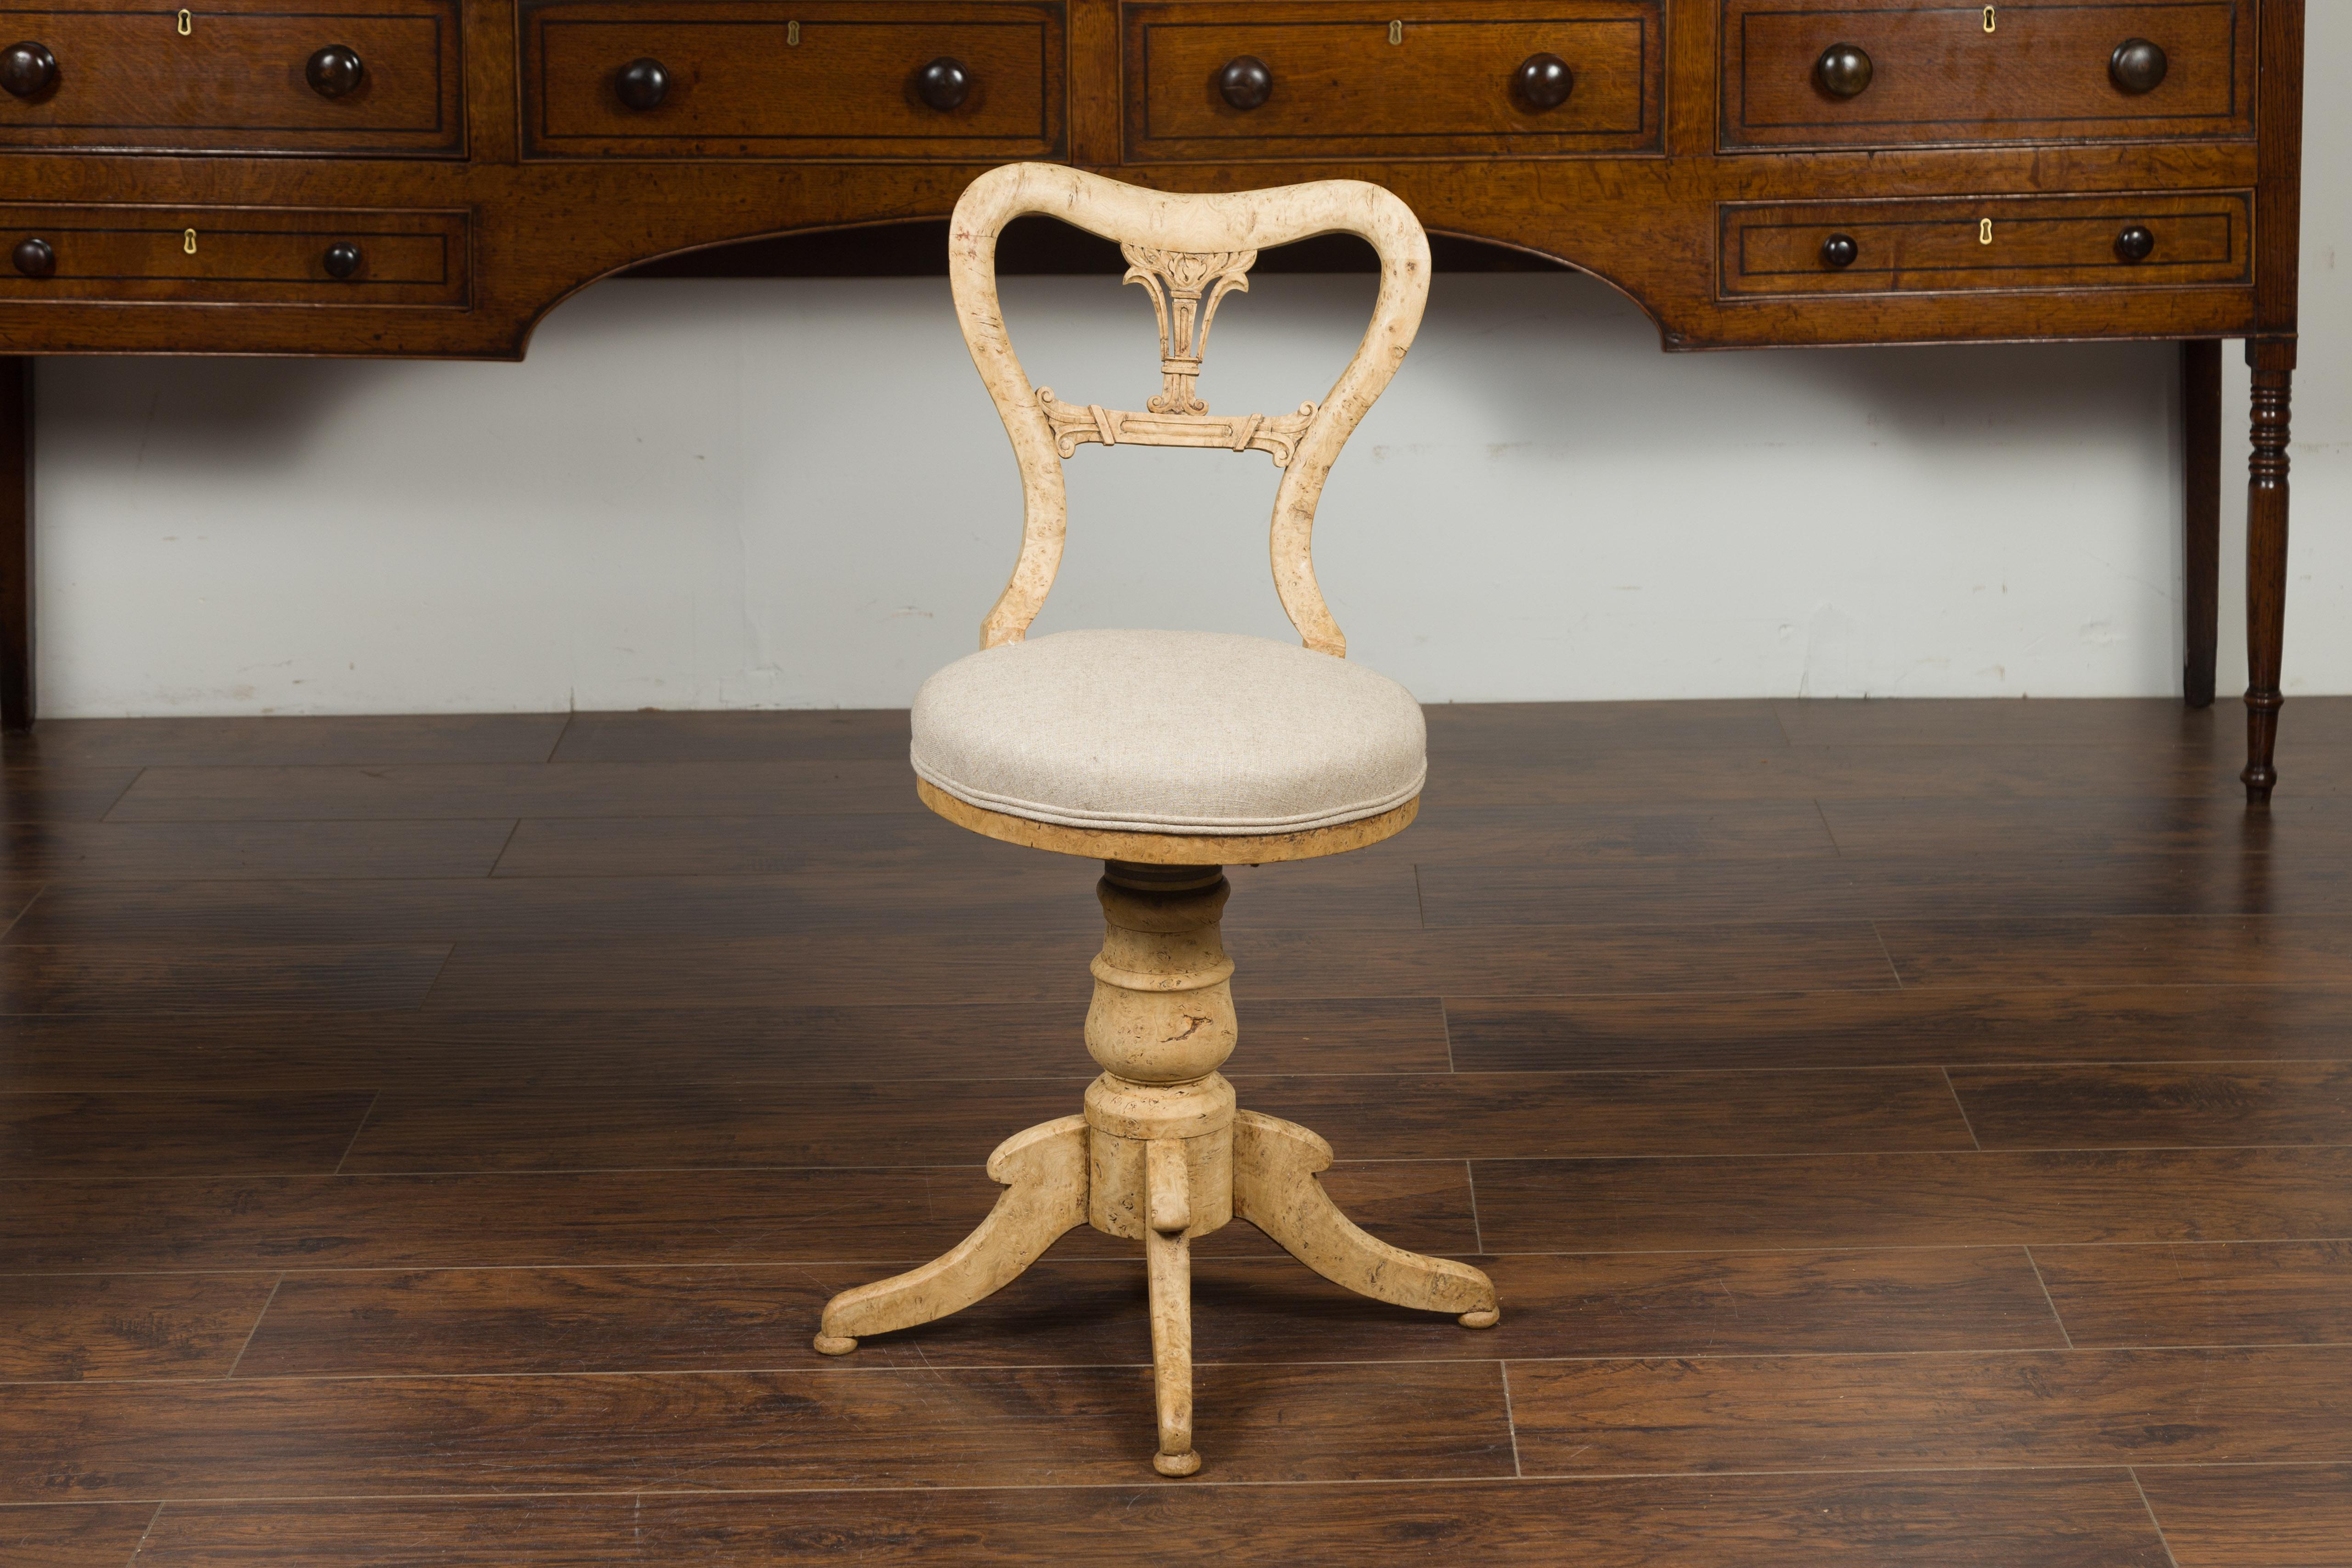 An Austrian Biedermeier bleached burled walnut swivel chair from the mid-19th century, with new upholstery. Born in Austria during the first half of the 19th century, this bleached swivel chair features an exquisite burled walnut pierced back,